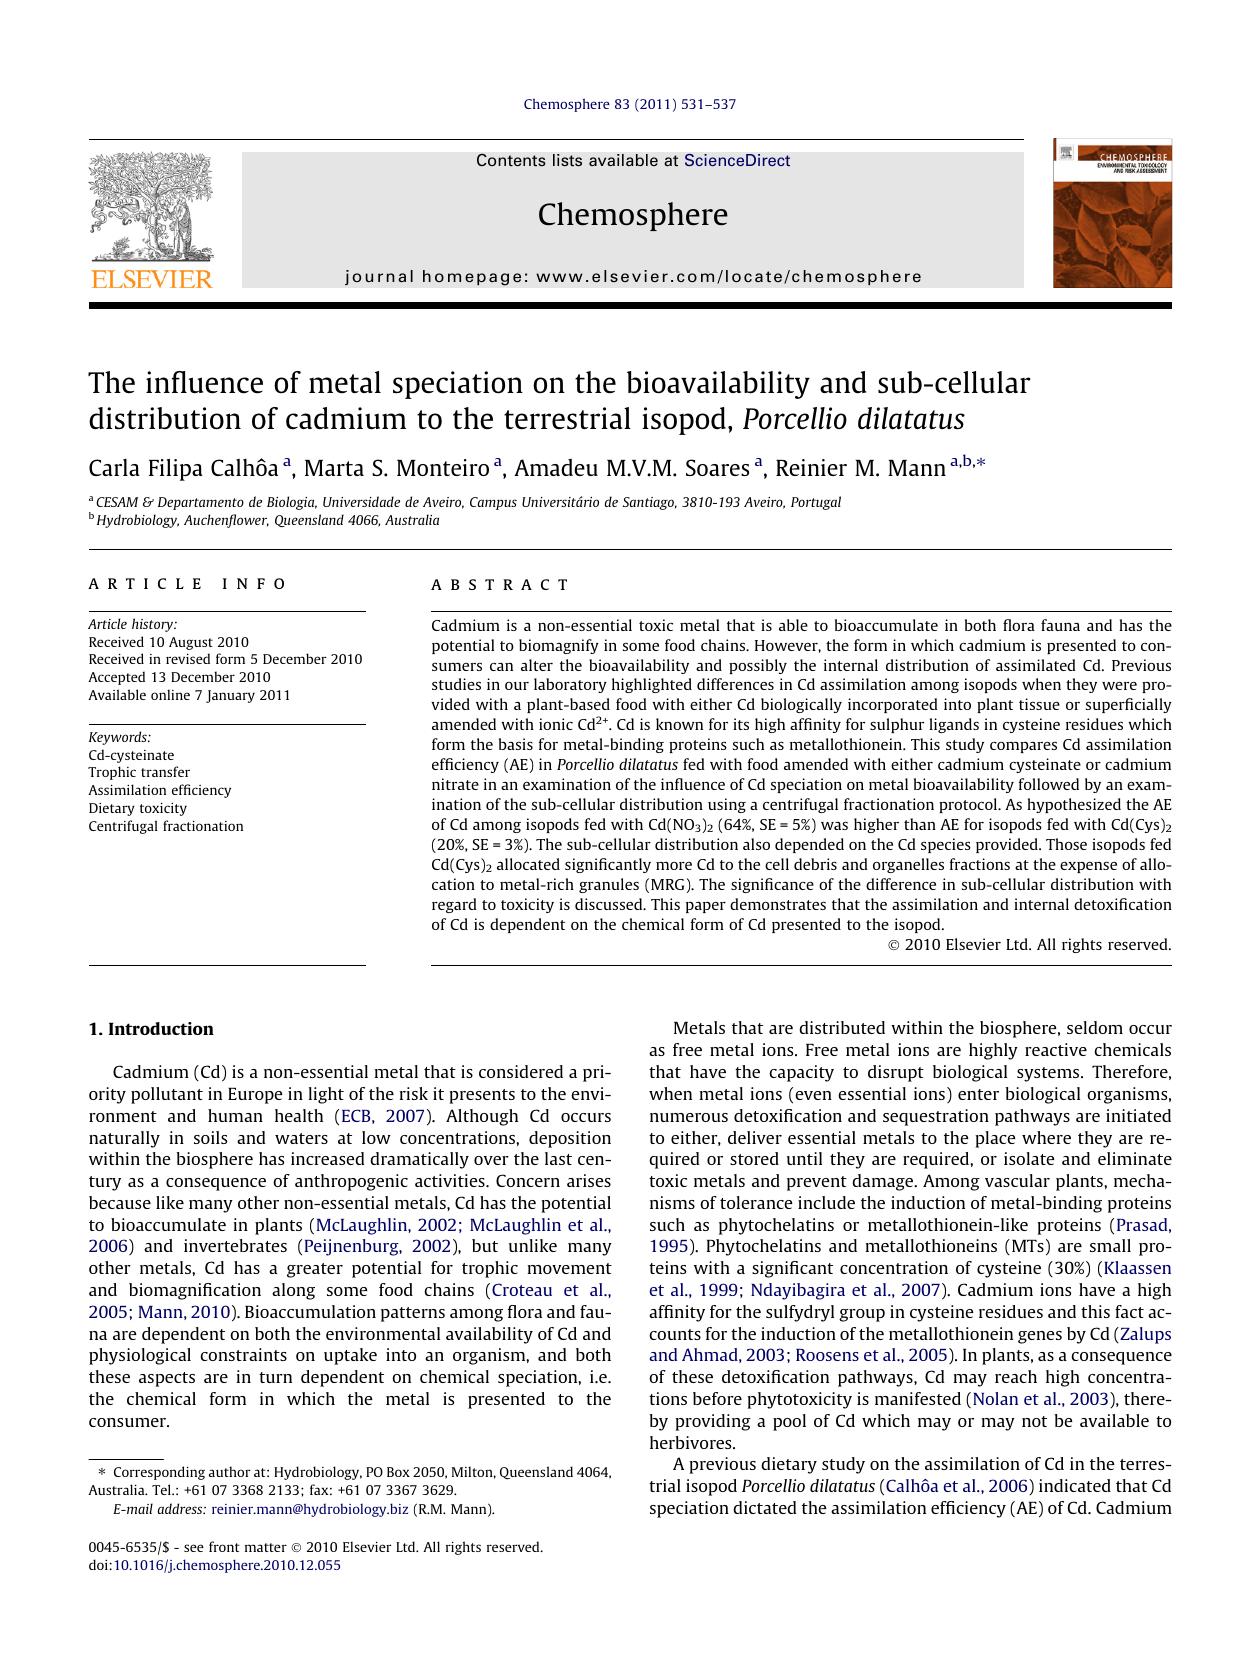 The influence of metal speciation on the bioavailability and sub-cellular distribution of cadmium to the terrestrial isopod, Porcellio dilatatus by Carla Filipa CalhÃ´a & Marta S. Monteiro & Amadeu M.V.M. Soares & Reinier M. Mann